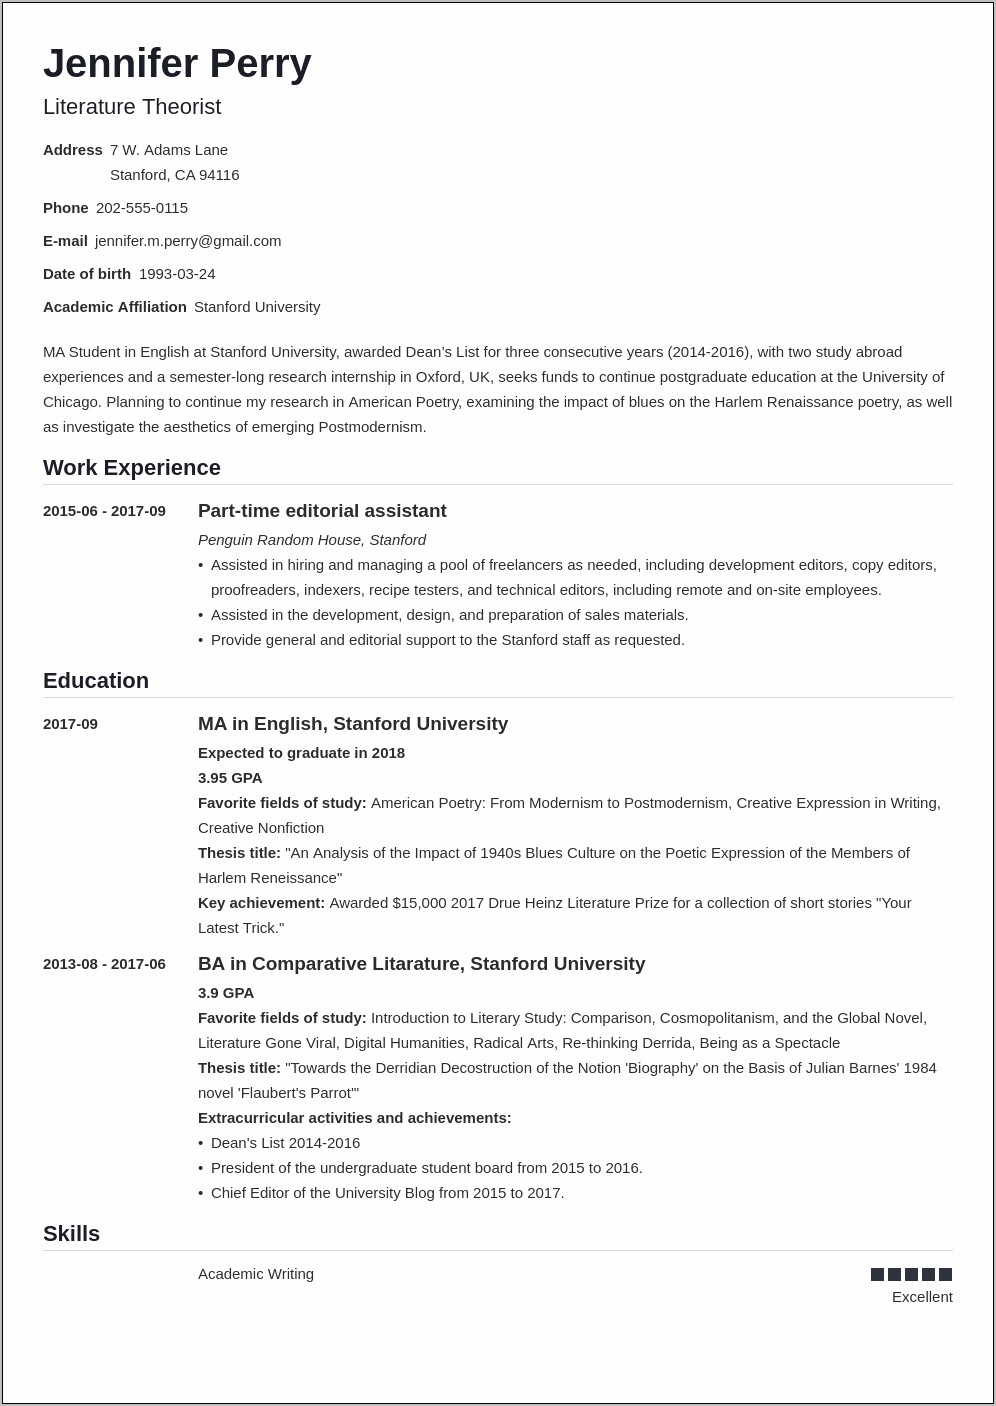 Resume Objective To Get Into College Program